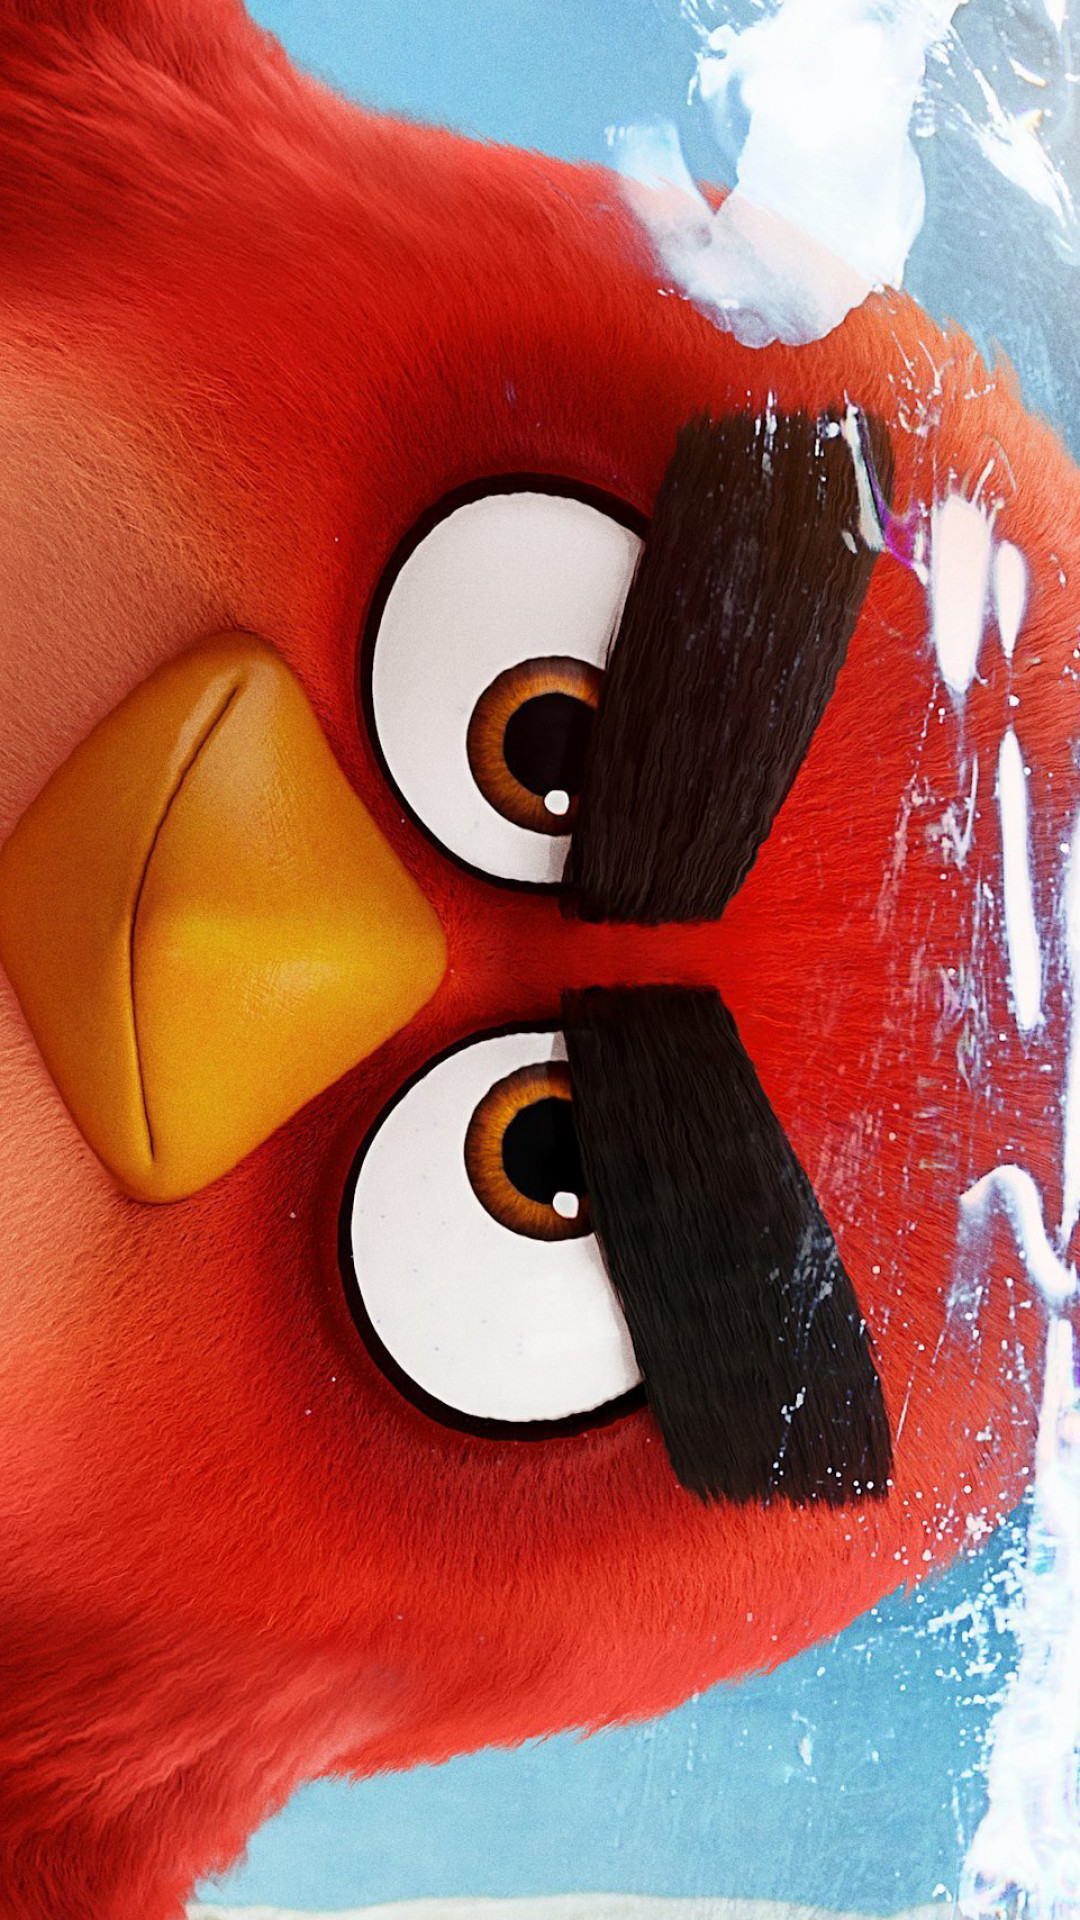 Angry Bird Wallpapers  Top 30 Best Angry Bird Wallpapers Download